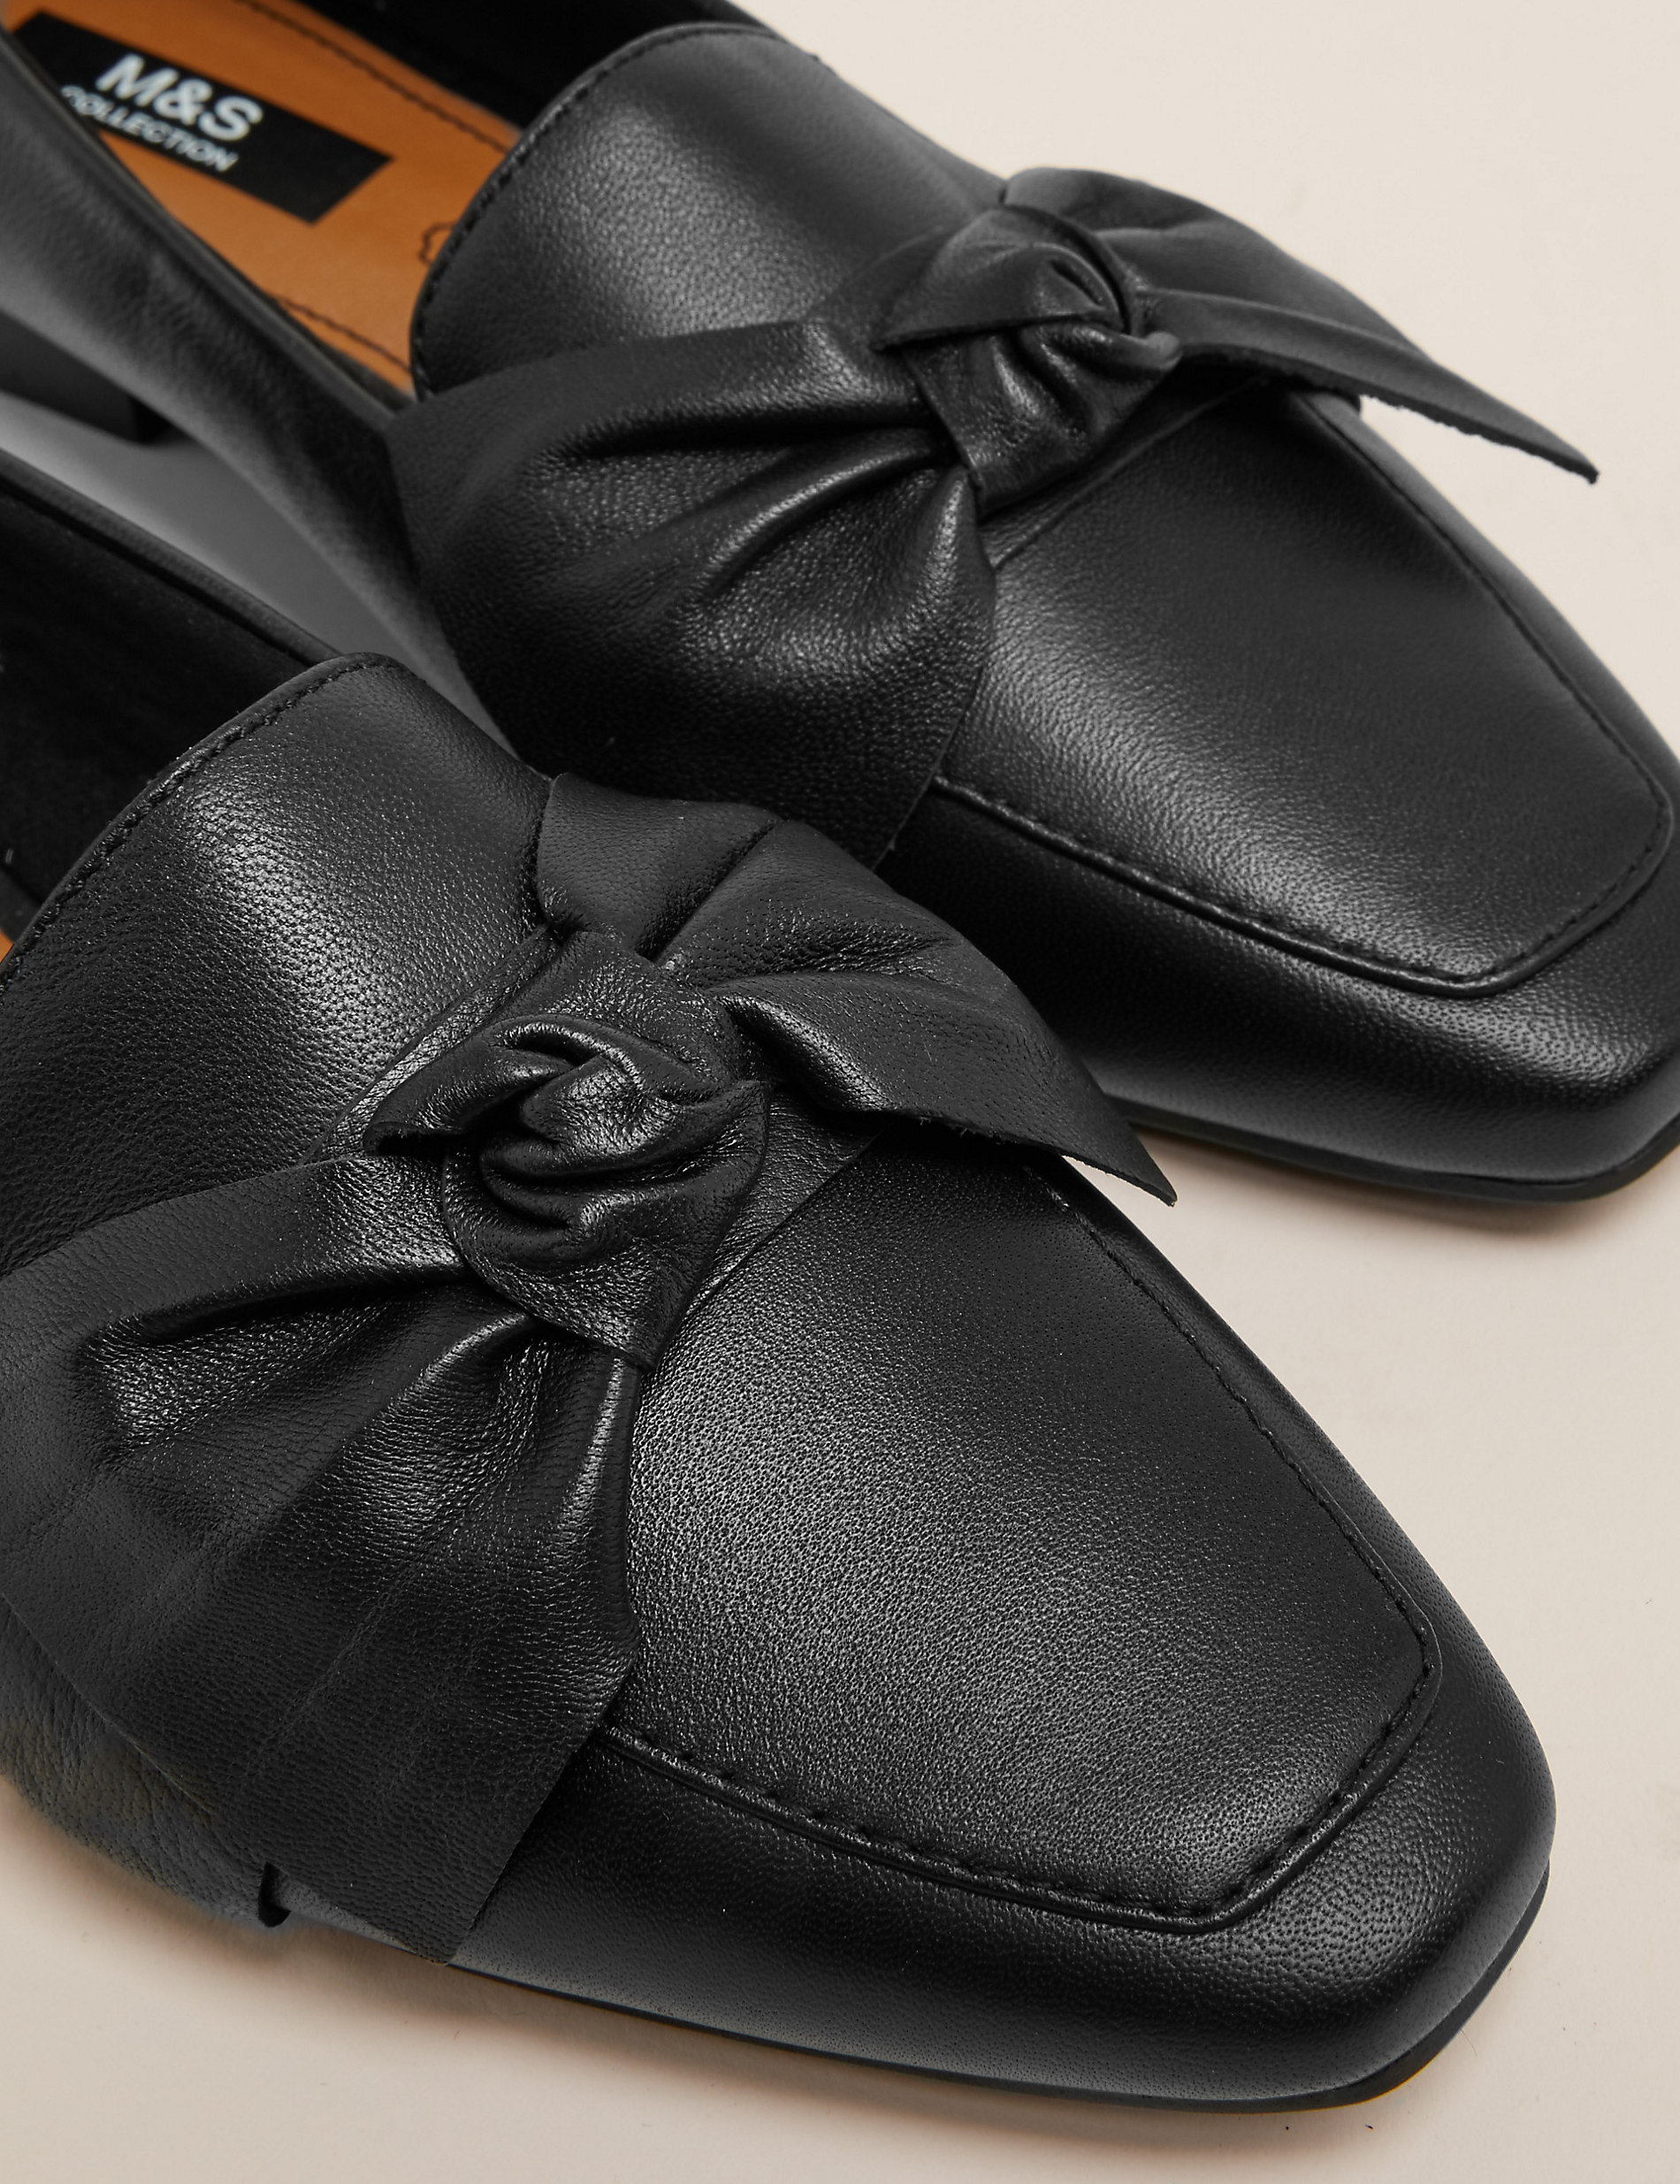 Leather Bow Flat Square Toe Loafers